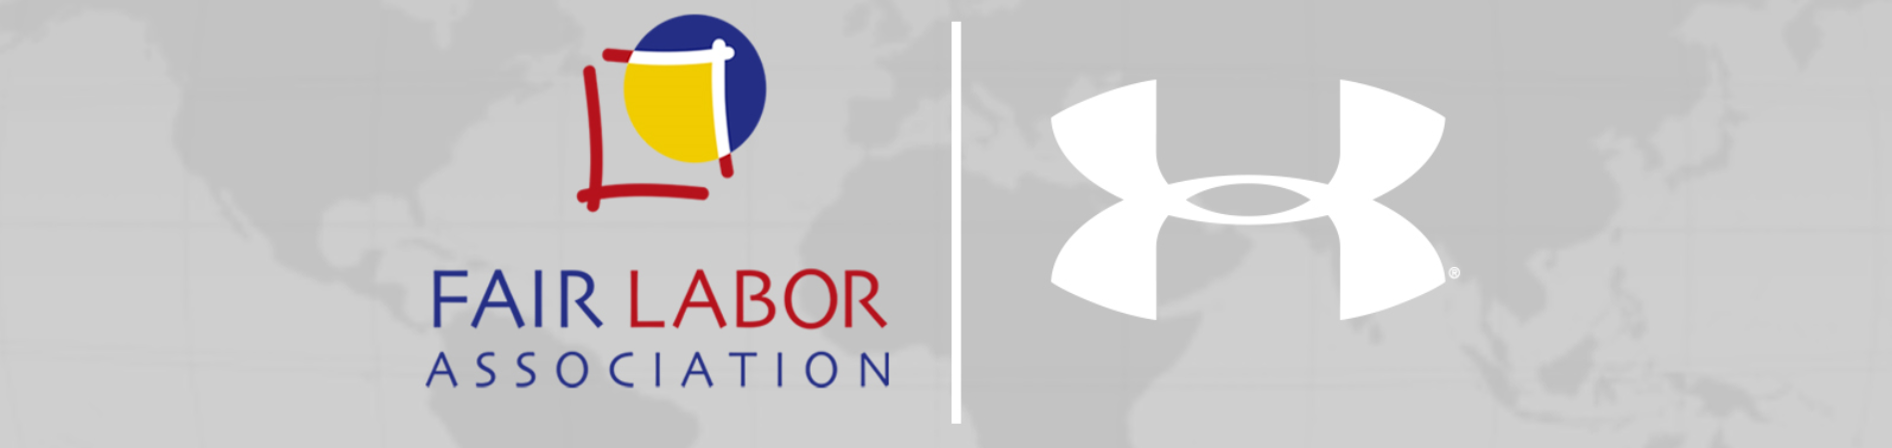 UA GETS ACCREDITED BY THE FAIR LABOR ASSOCIATION | by Life at Under Armour  | Medium